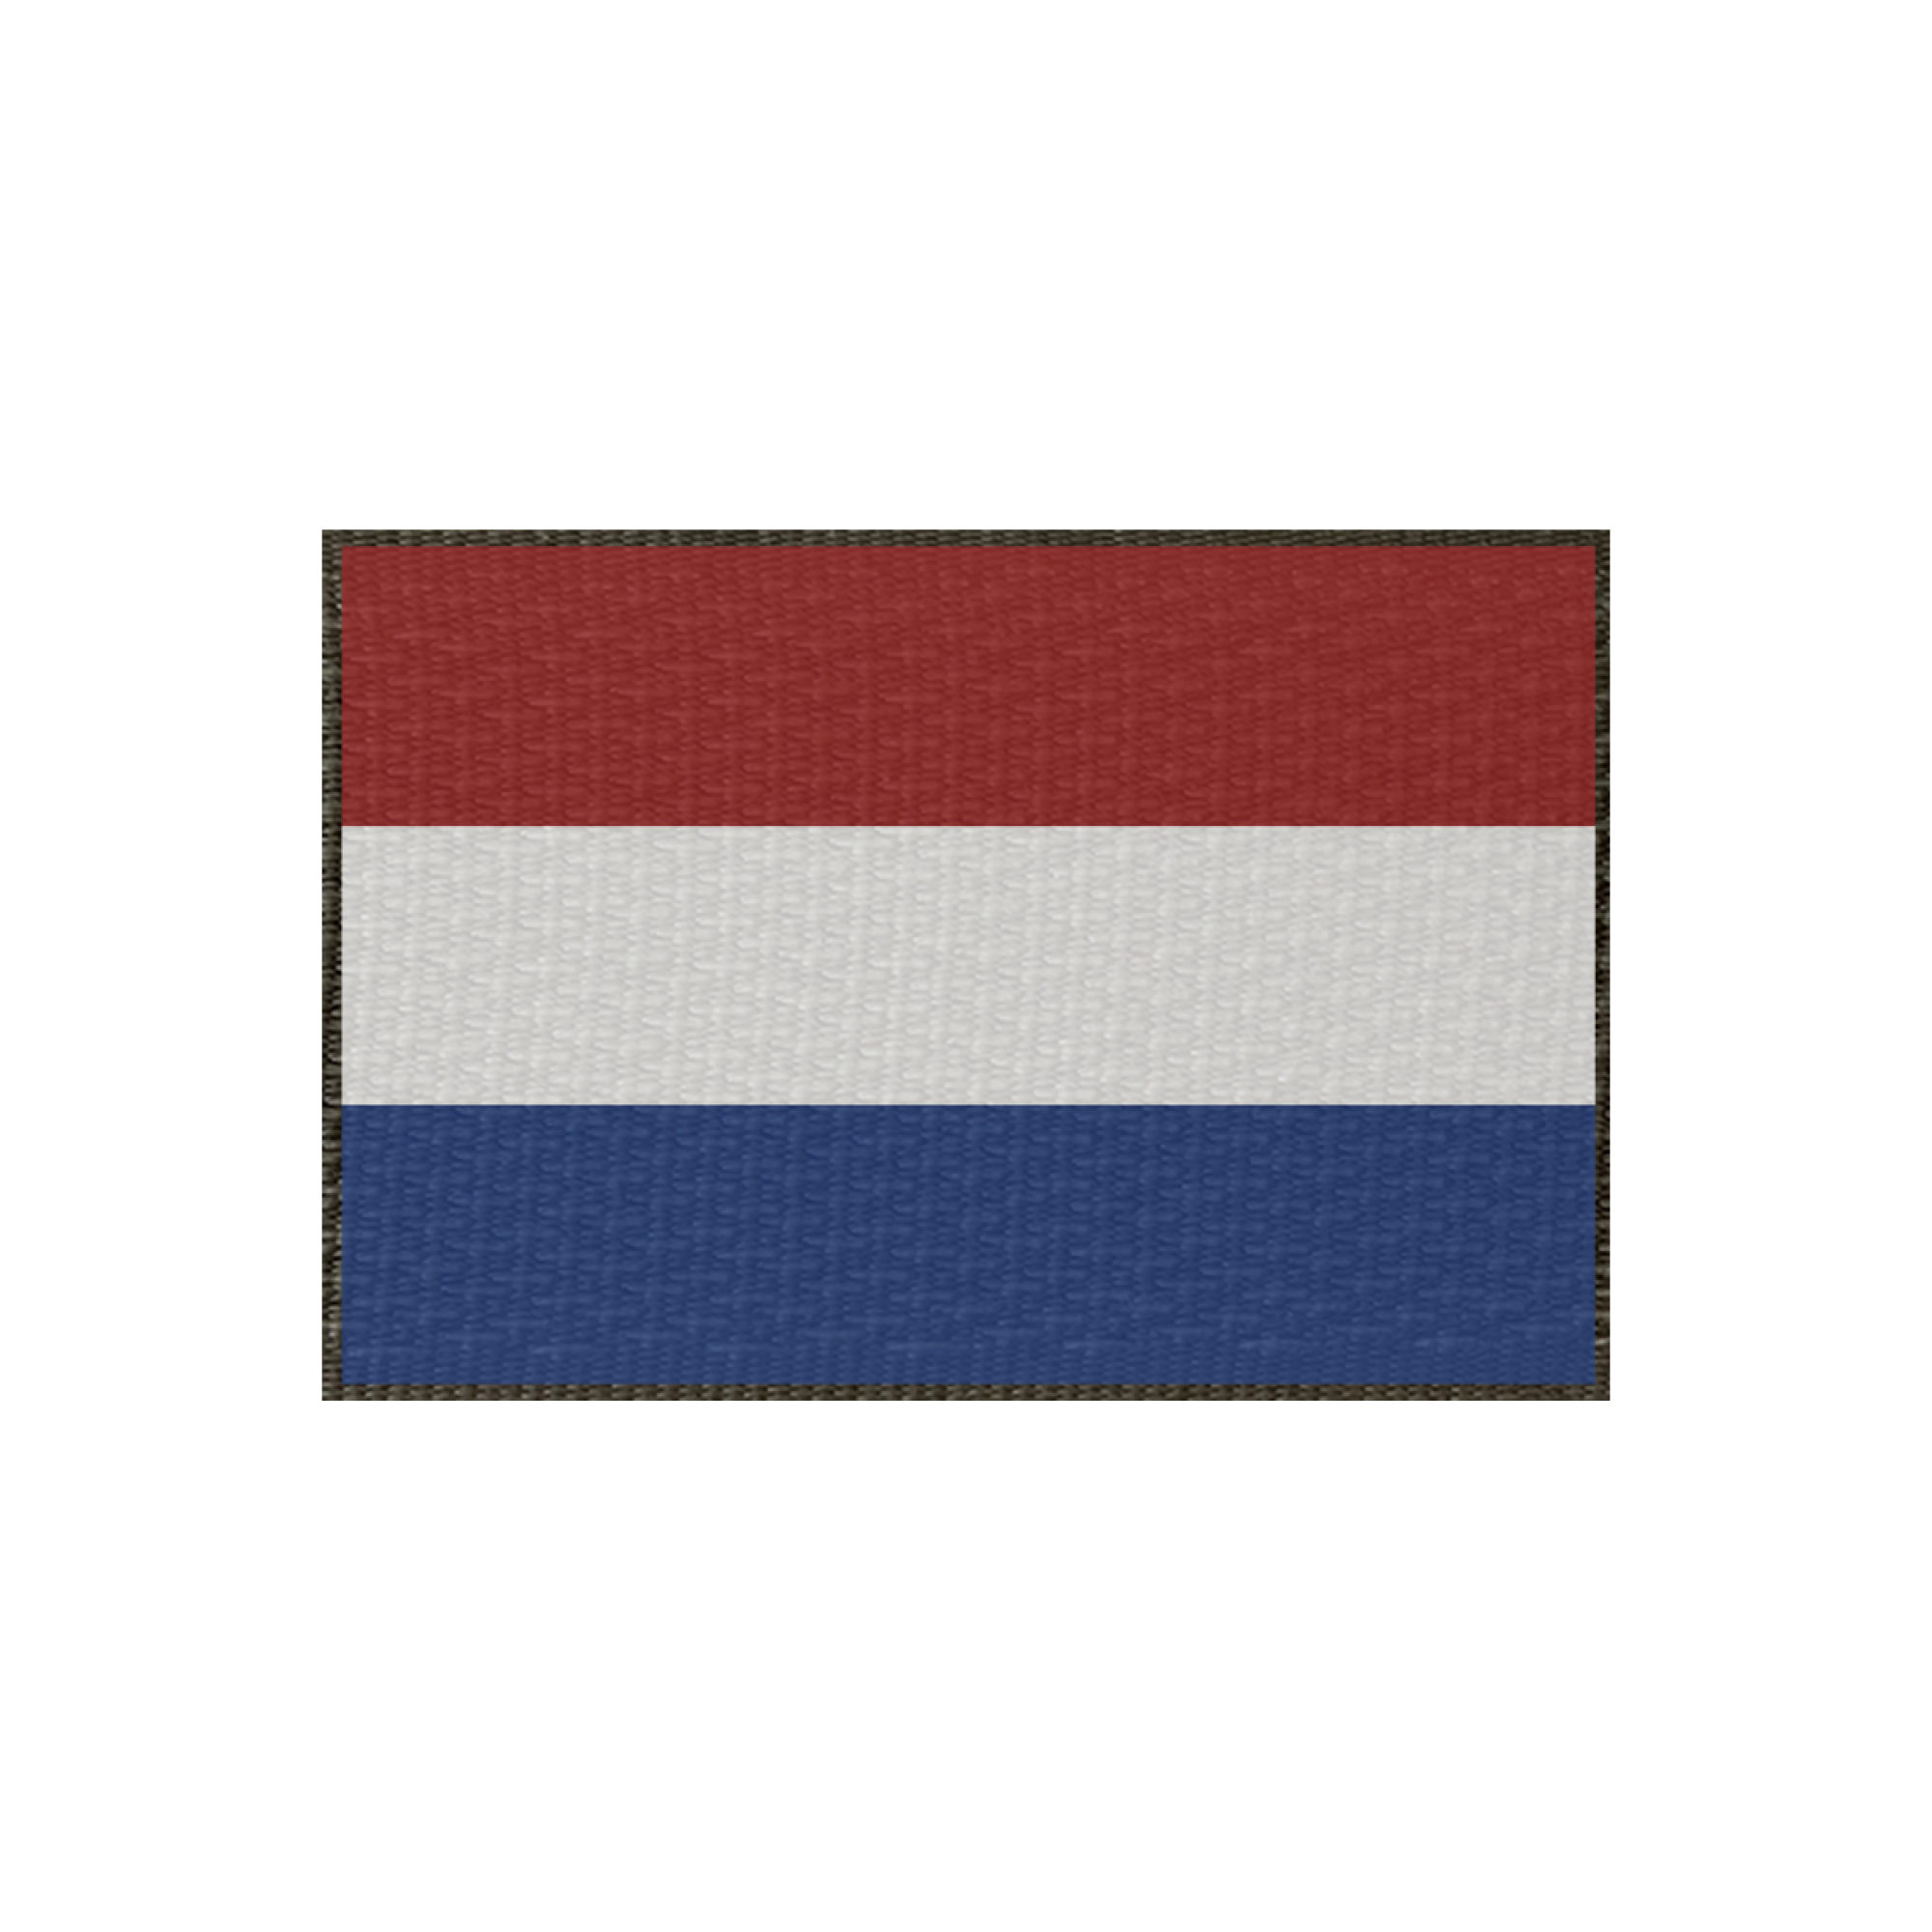 Patch Flagge Holland 45x30mm, Klett